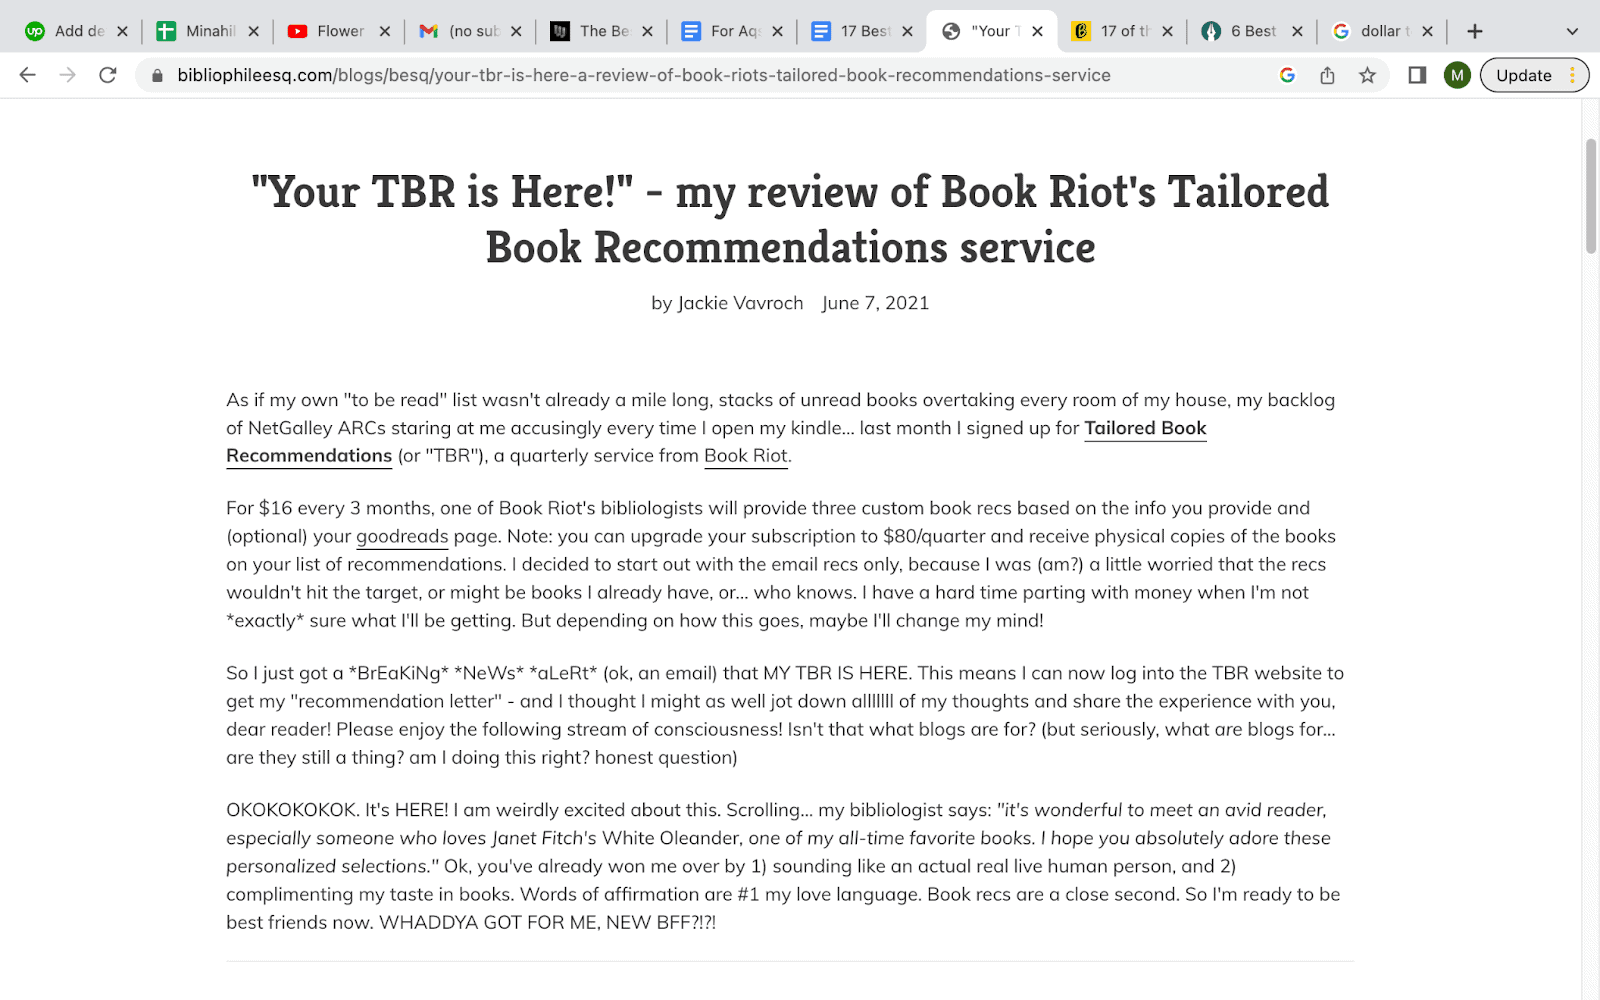 Positive response by a user of Tailored Book Platform